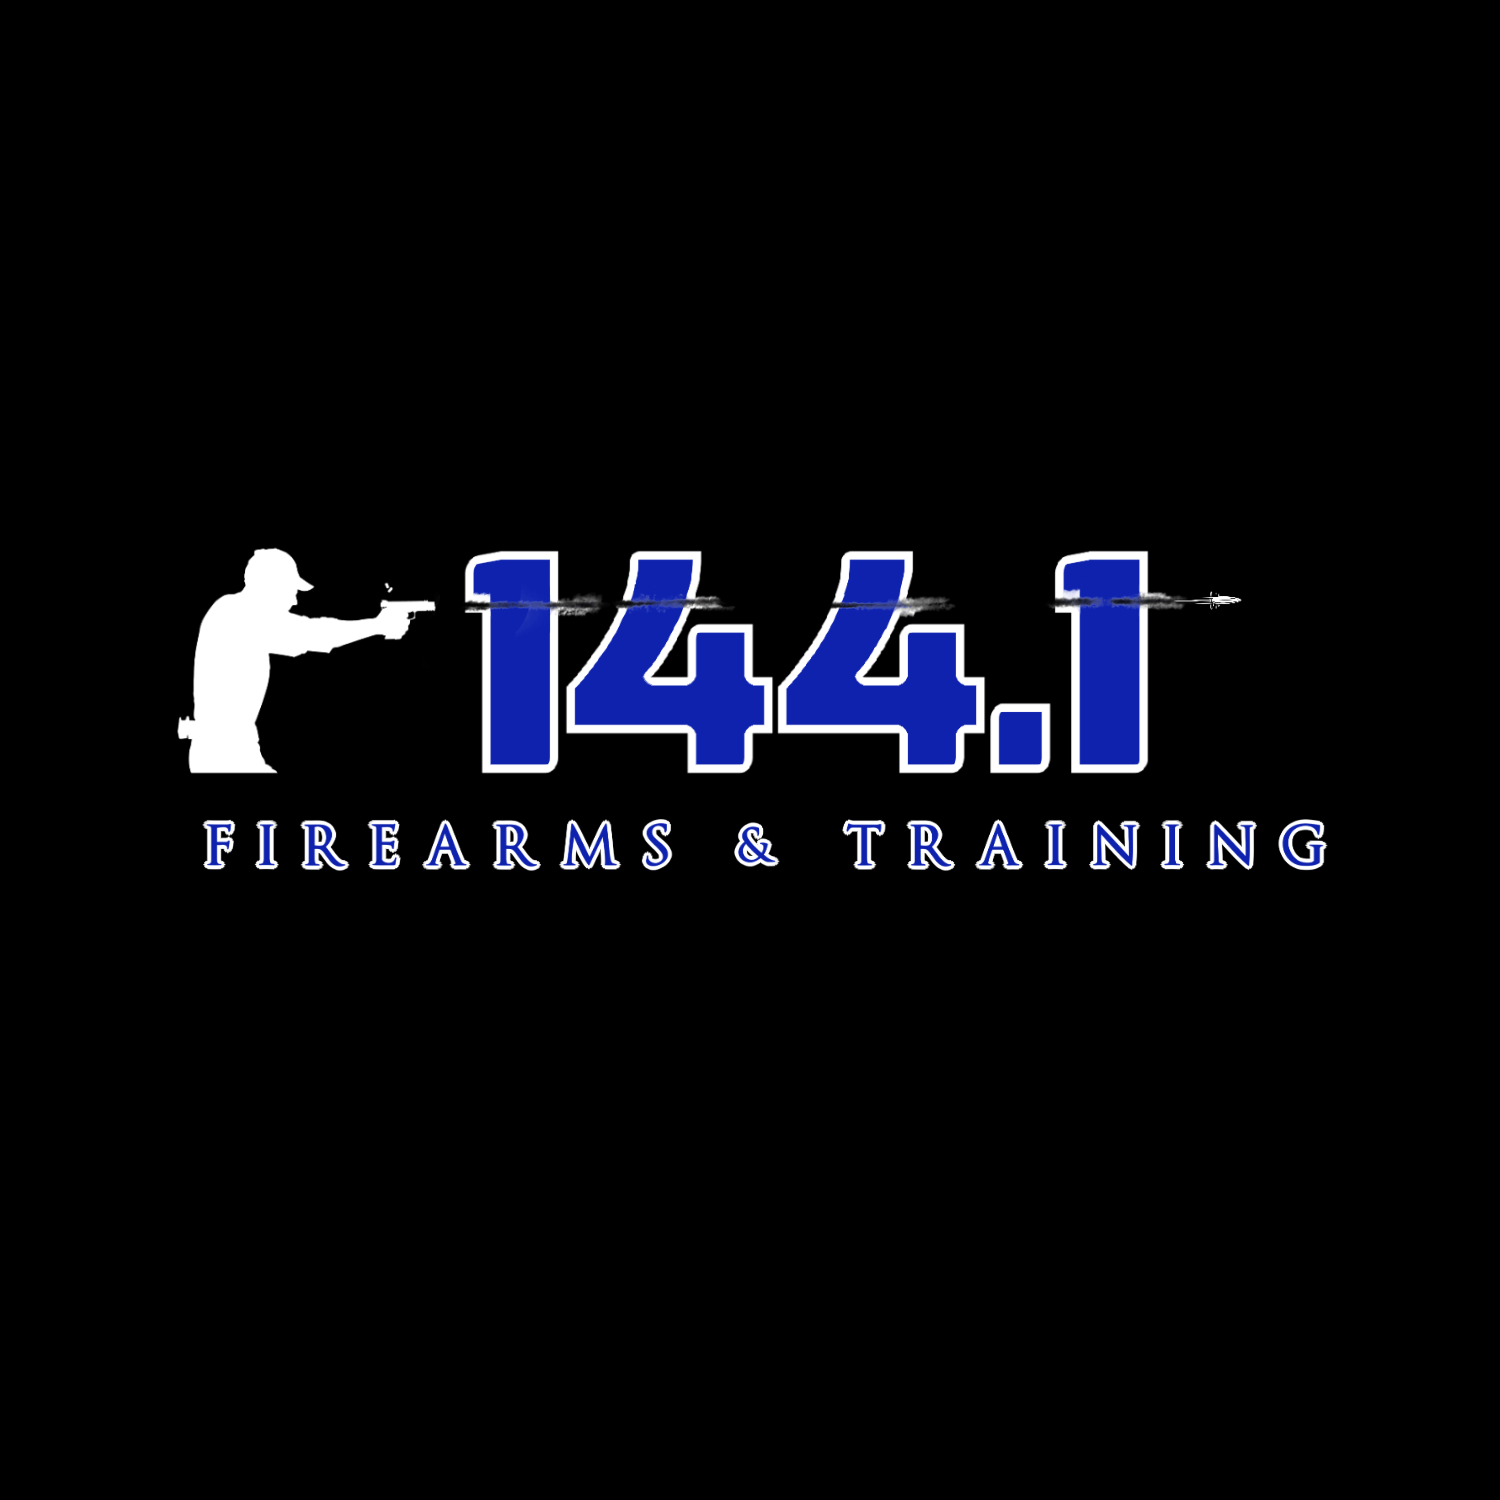 144.1 Firearms Training Partner Page